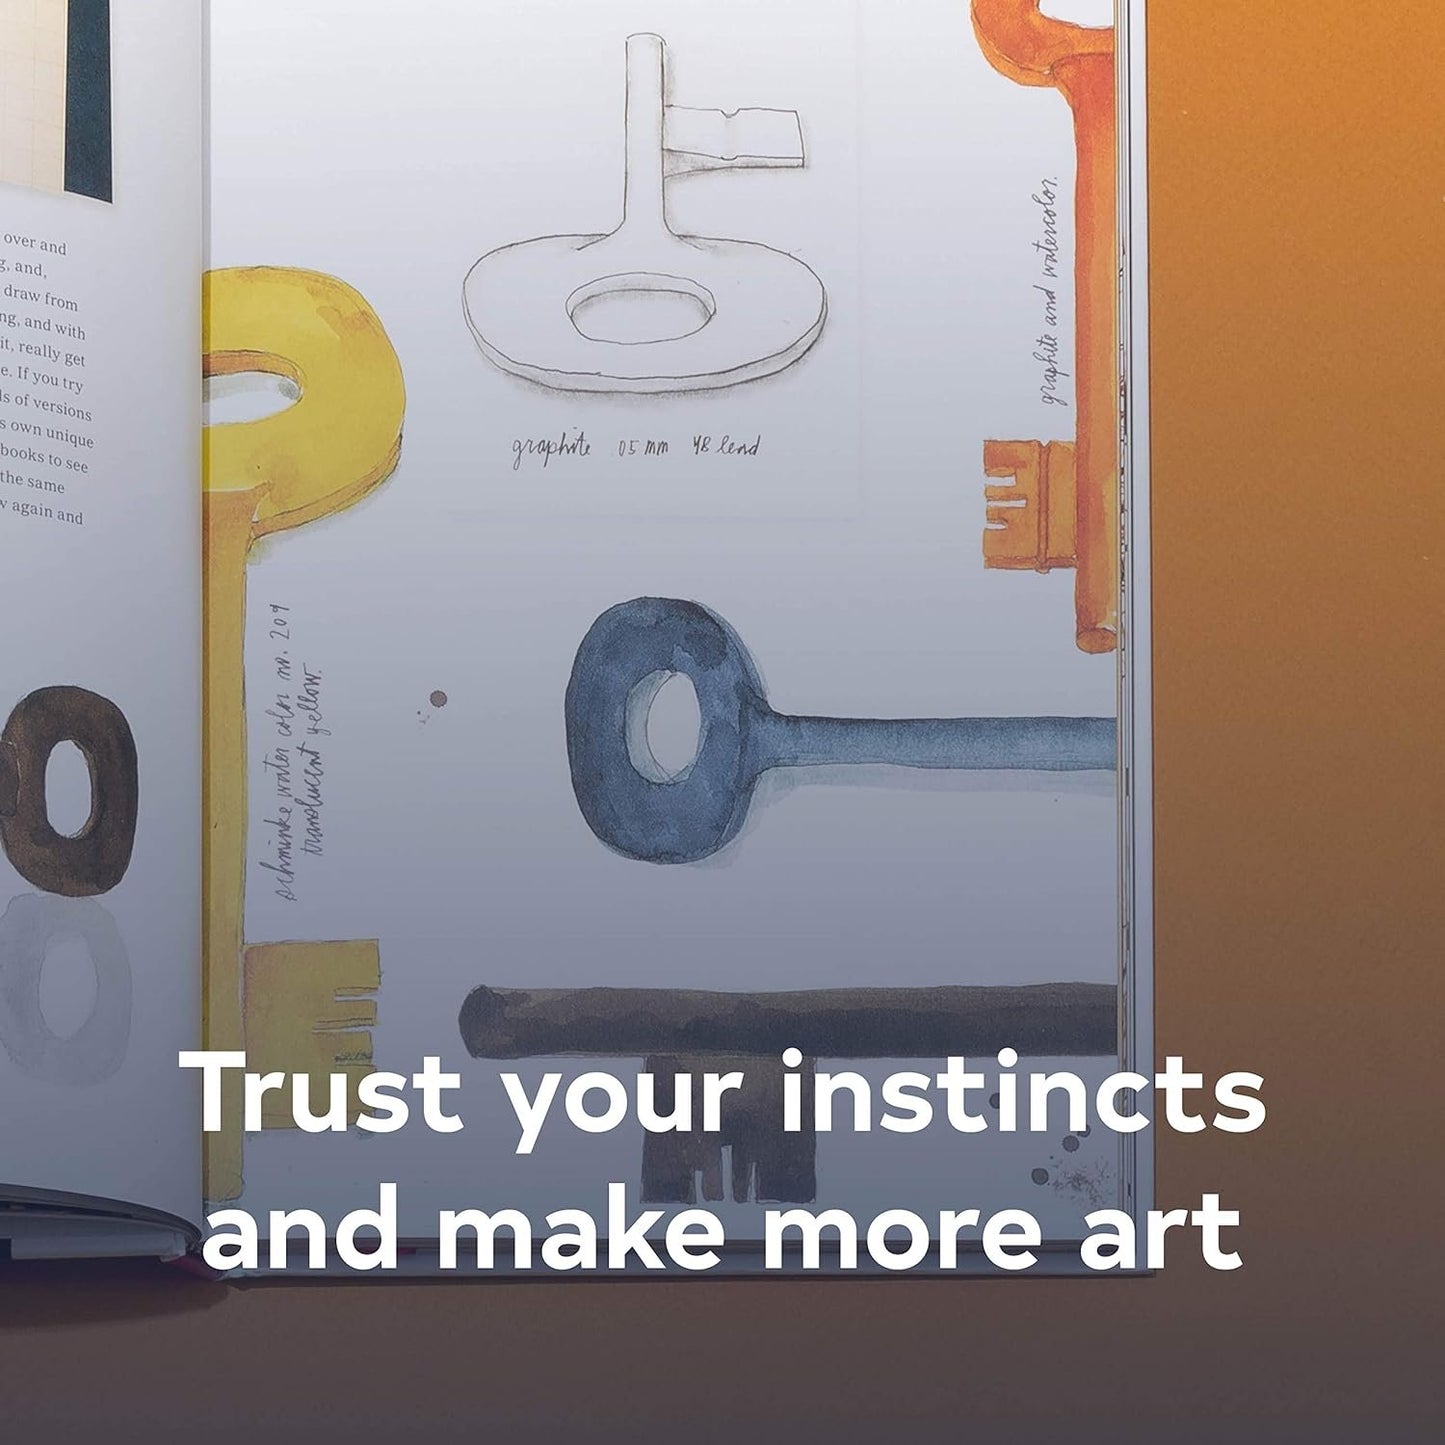 In Pursuit of Inspiration: Trust Your Instincts and Make More Art (Creativity Exercises, Art Book for Artists Techniques)